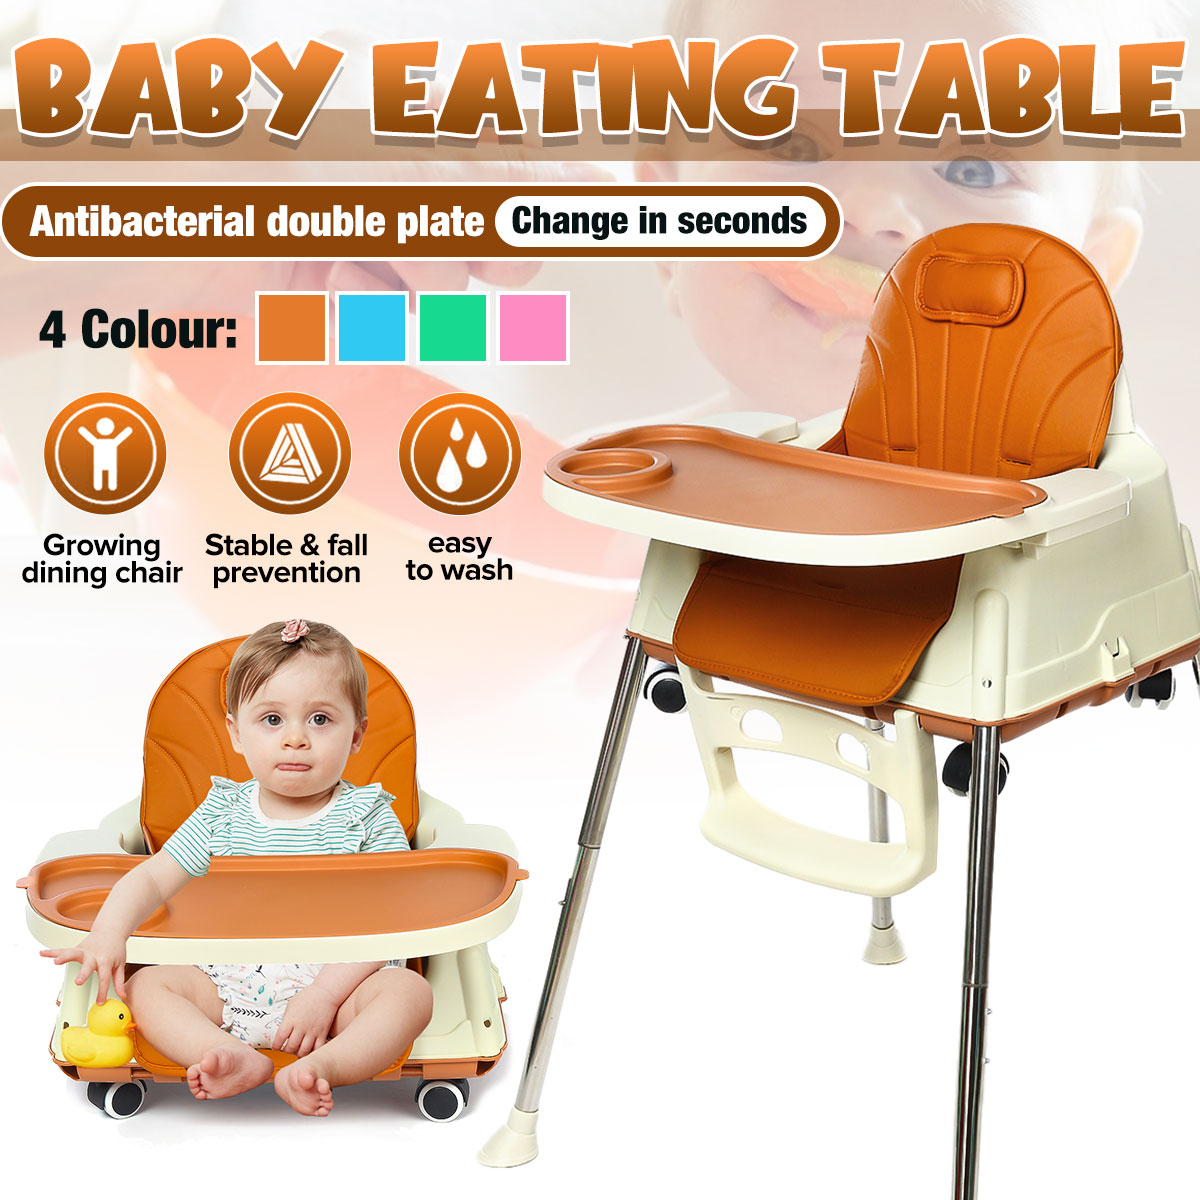 Childrens-Dining-Chair-Baby-Eating-Table-BB-Plastic-Multifunctional-Dining-Chair-Men-and-Women-Baby--1951925-1